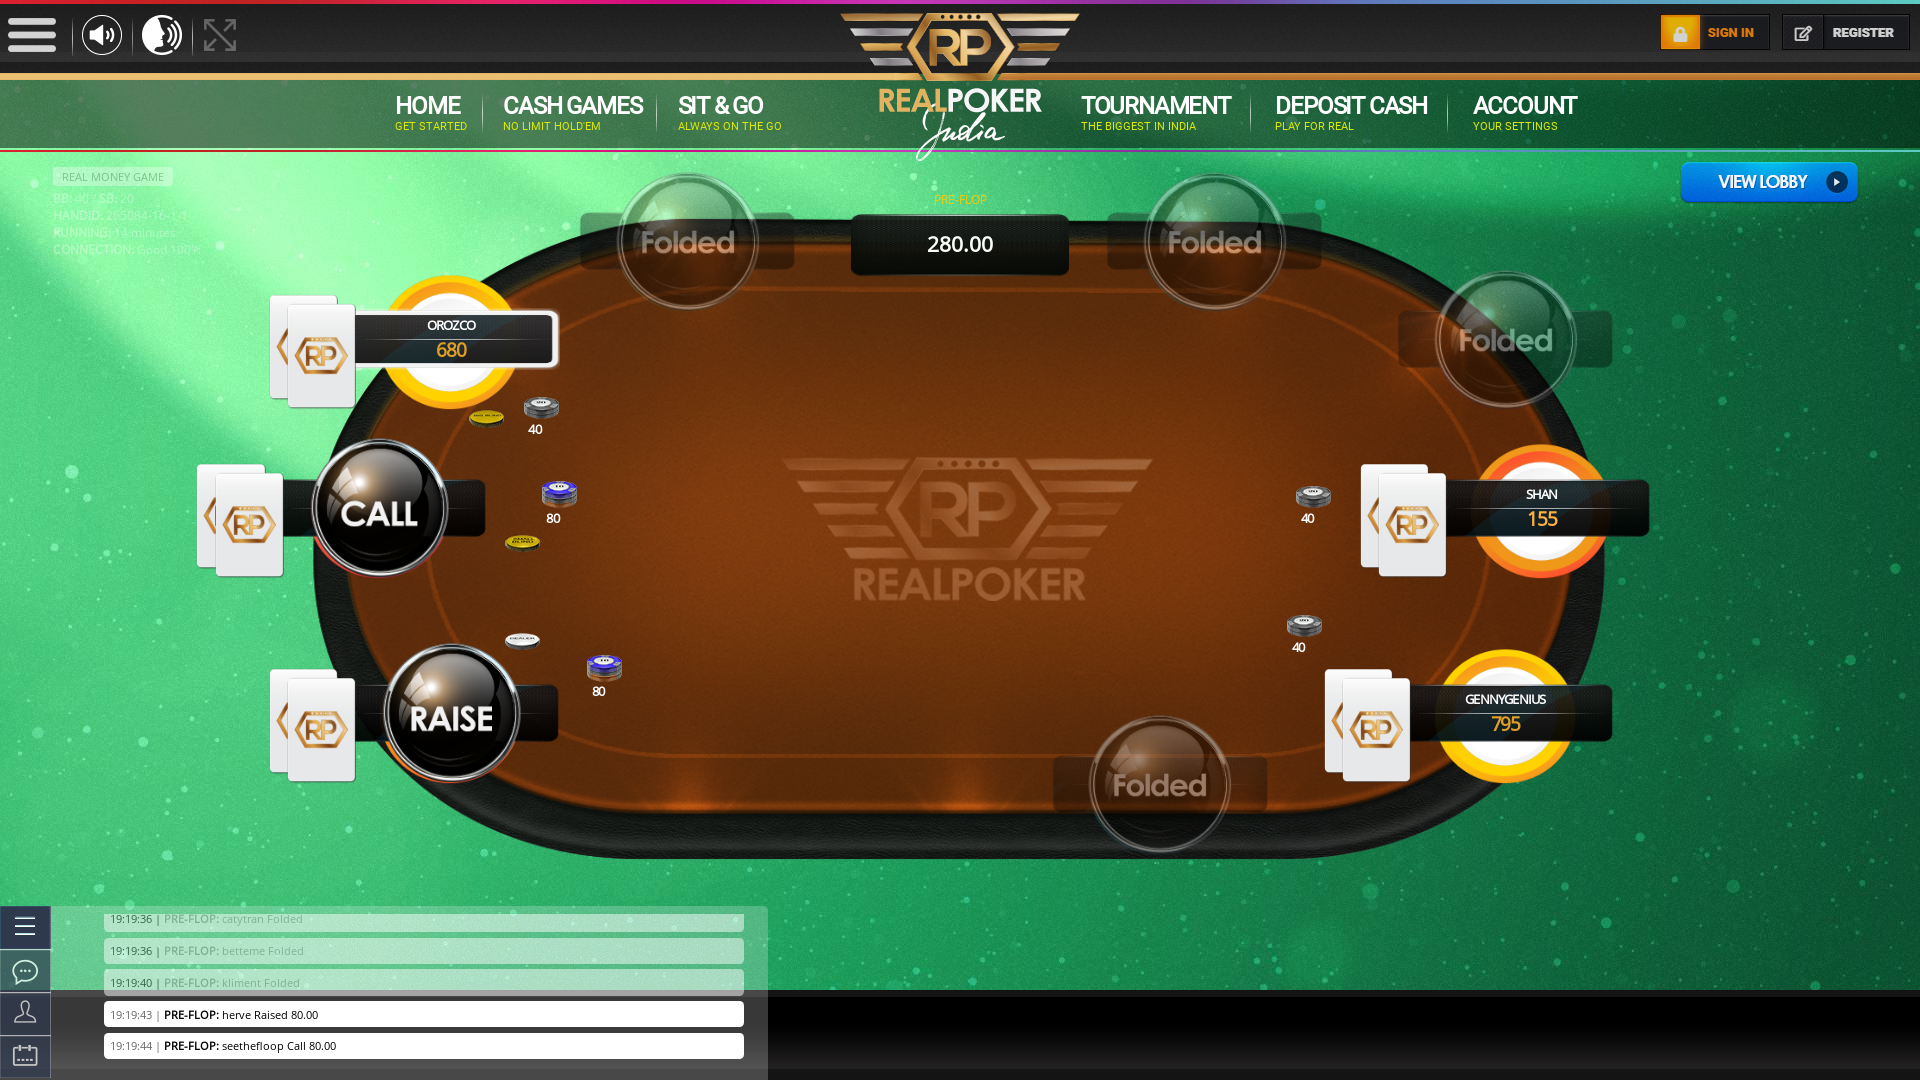 Indian poker on a 10 player table in the 14th minute